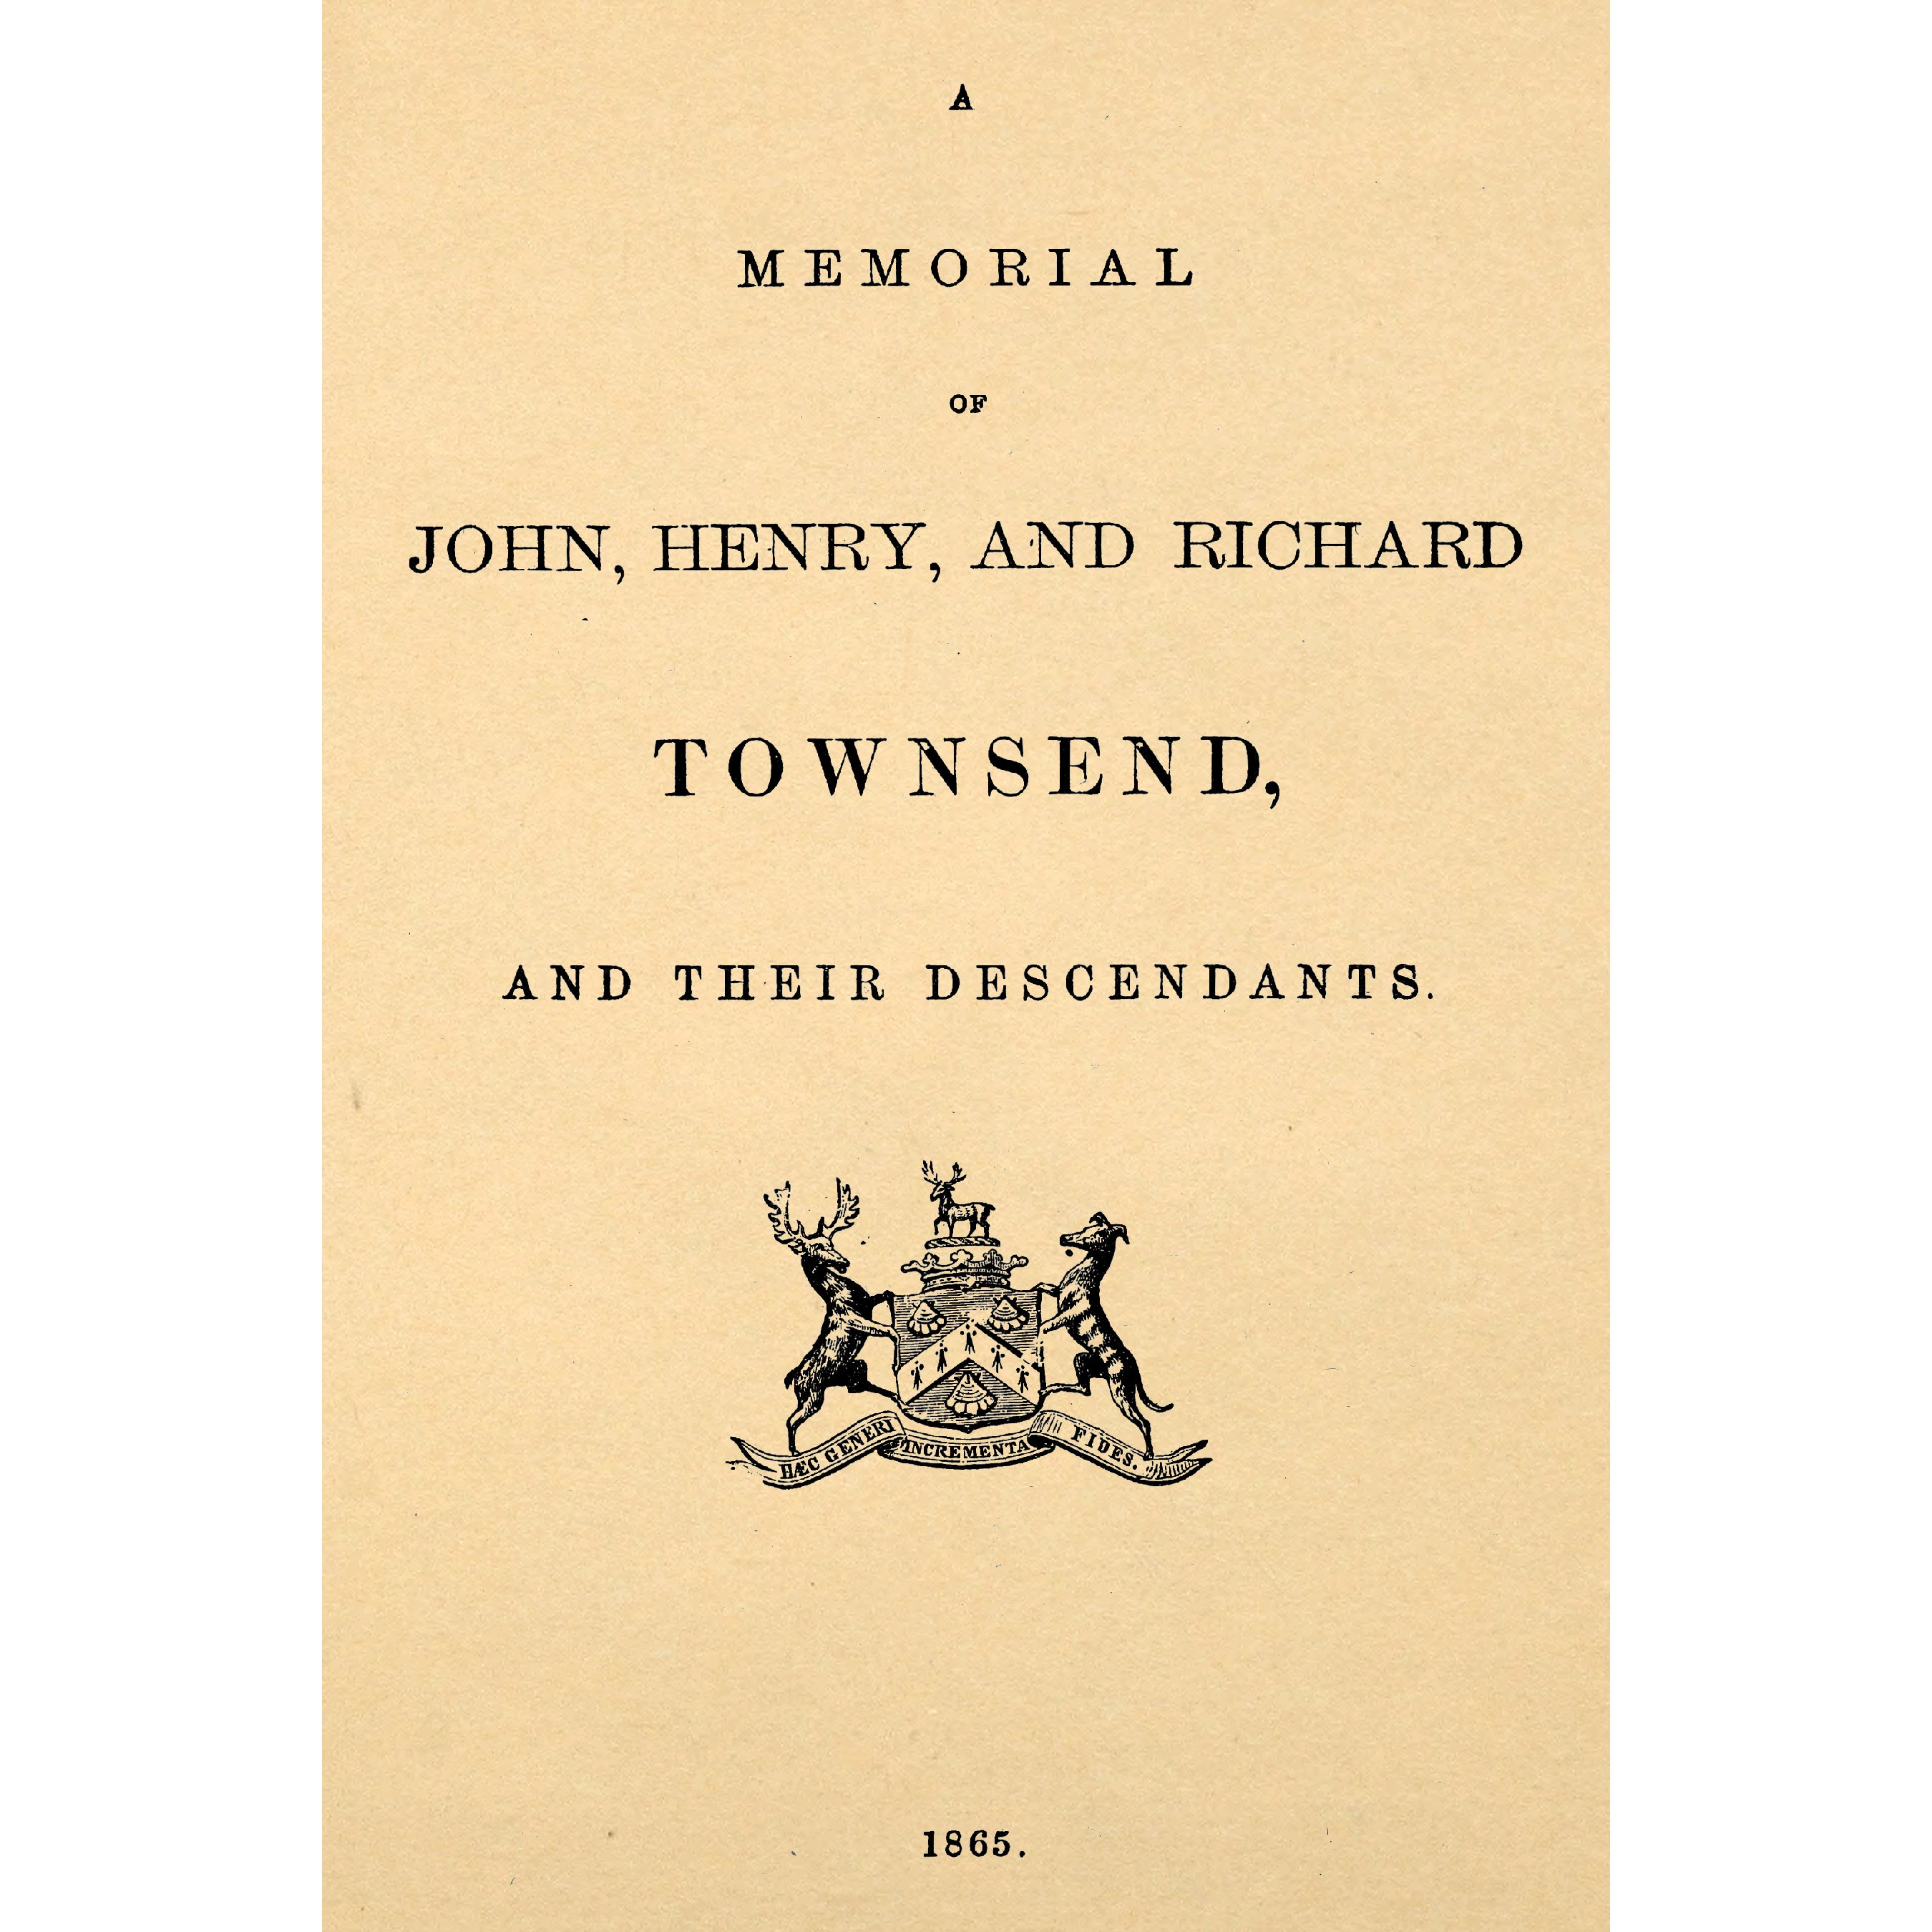 A memorial of John, Henry, and Richard Townsend, and their descendants